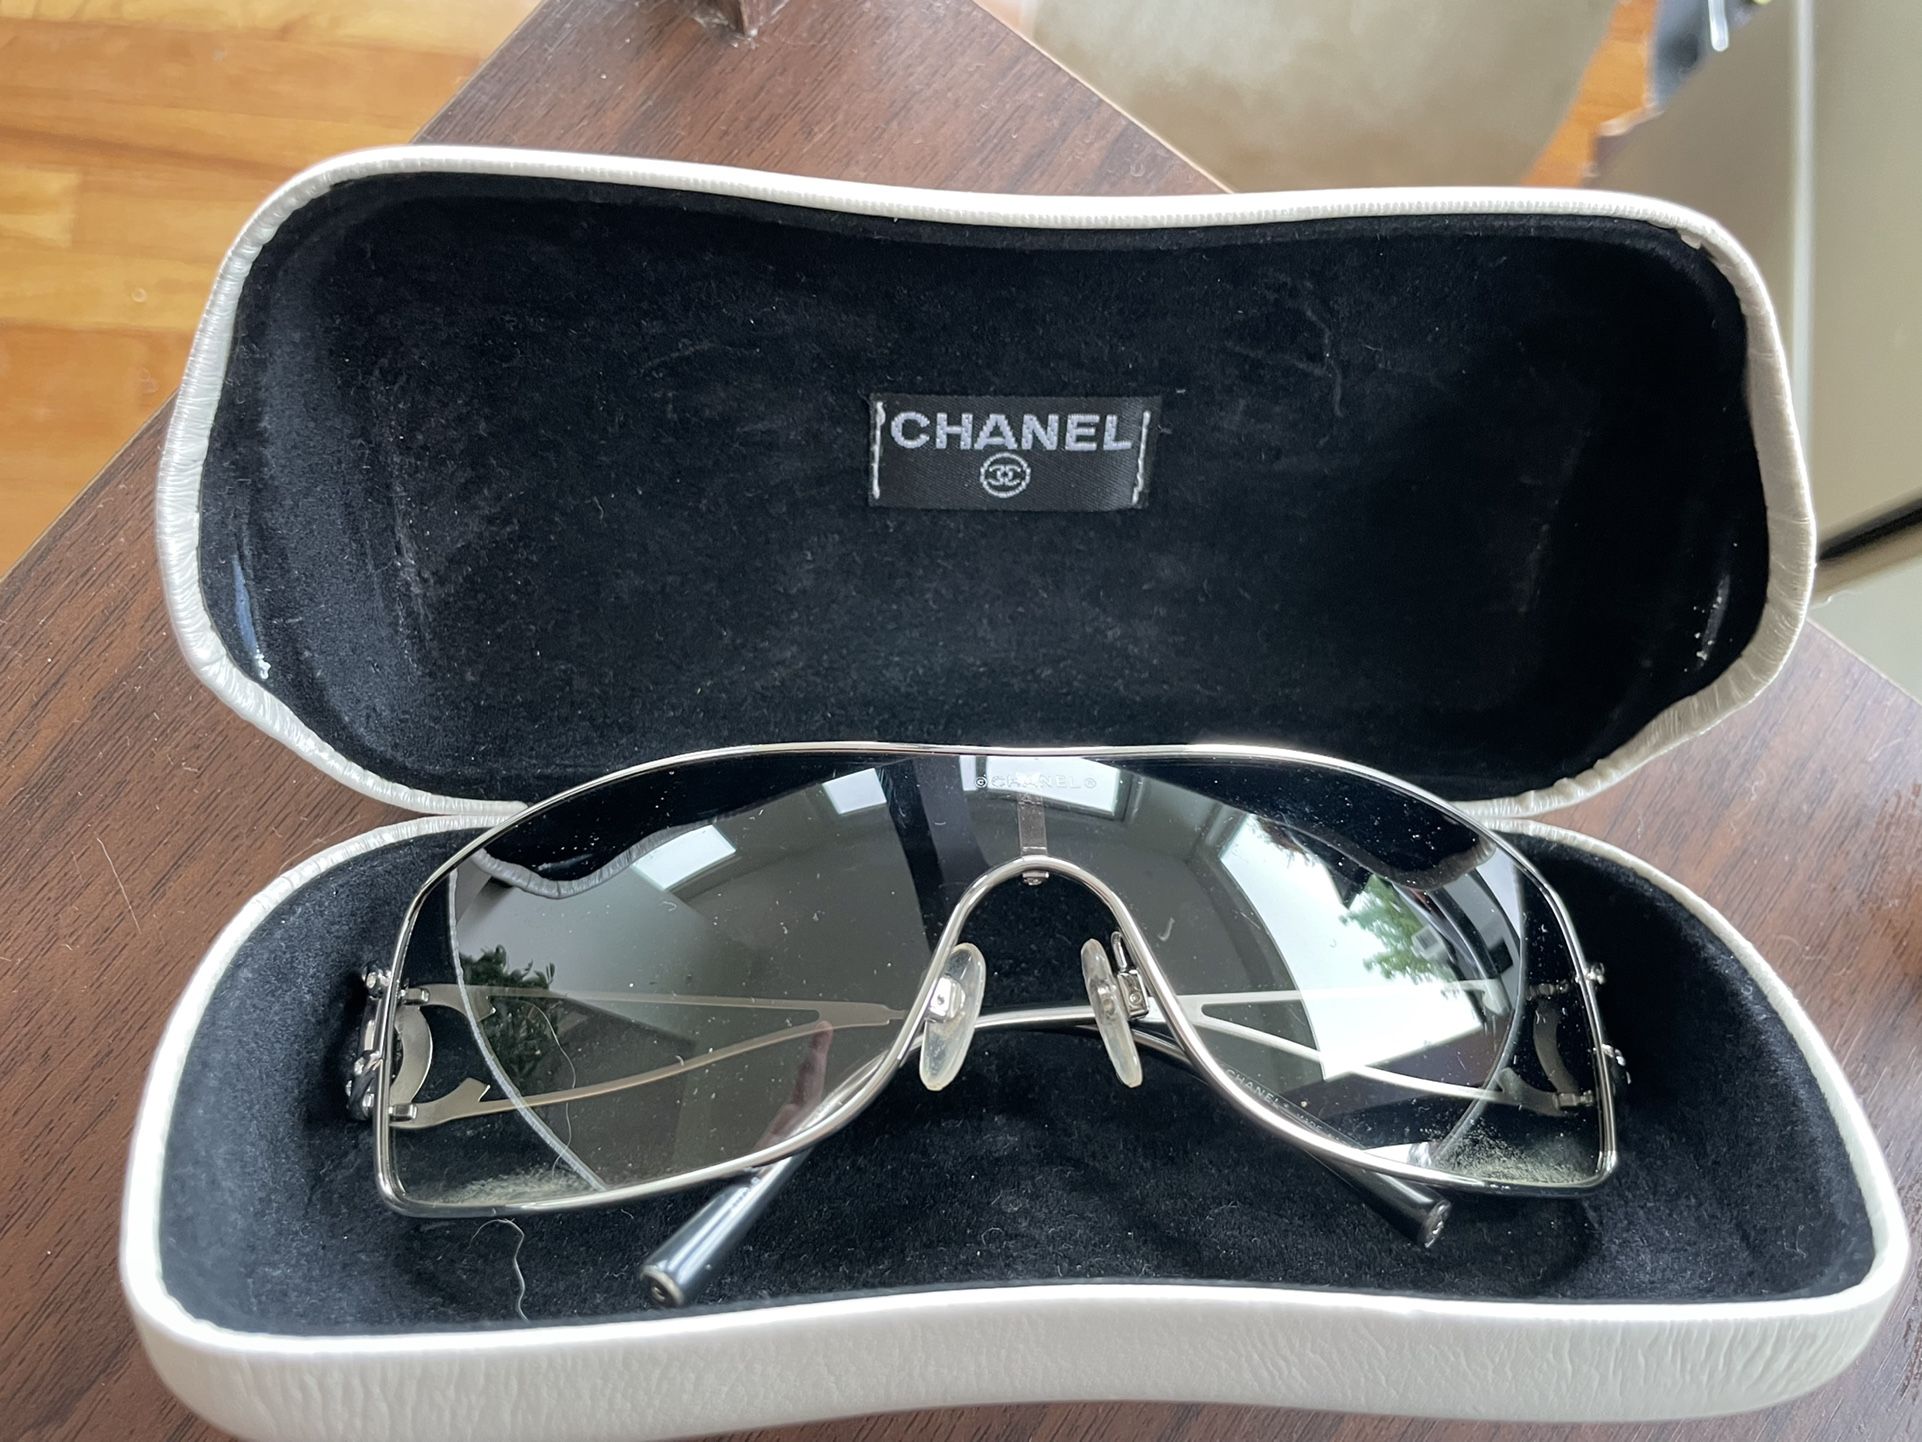 Channel Sunglasses (Authentic) w/Logo Clamshell Case